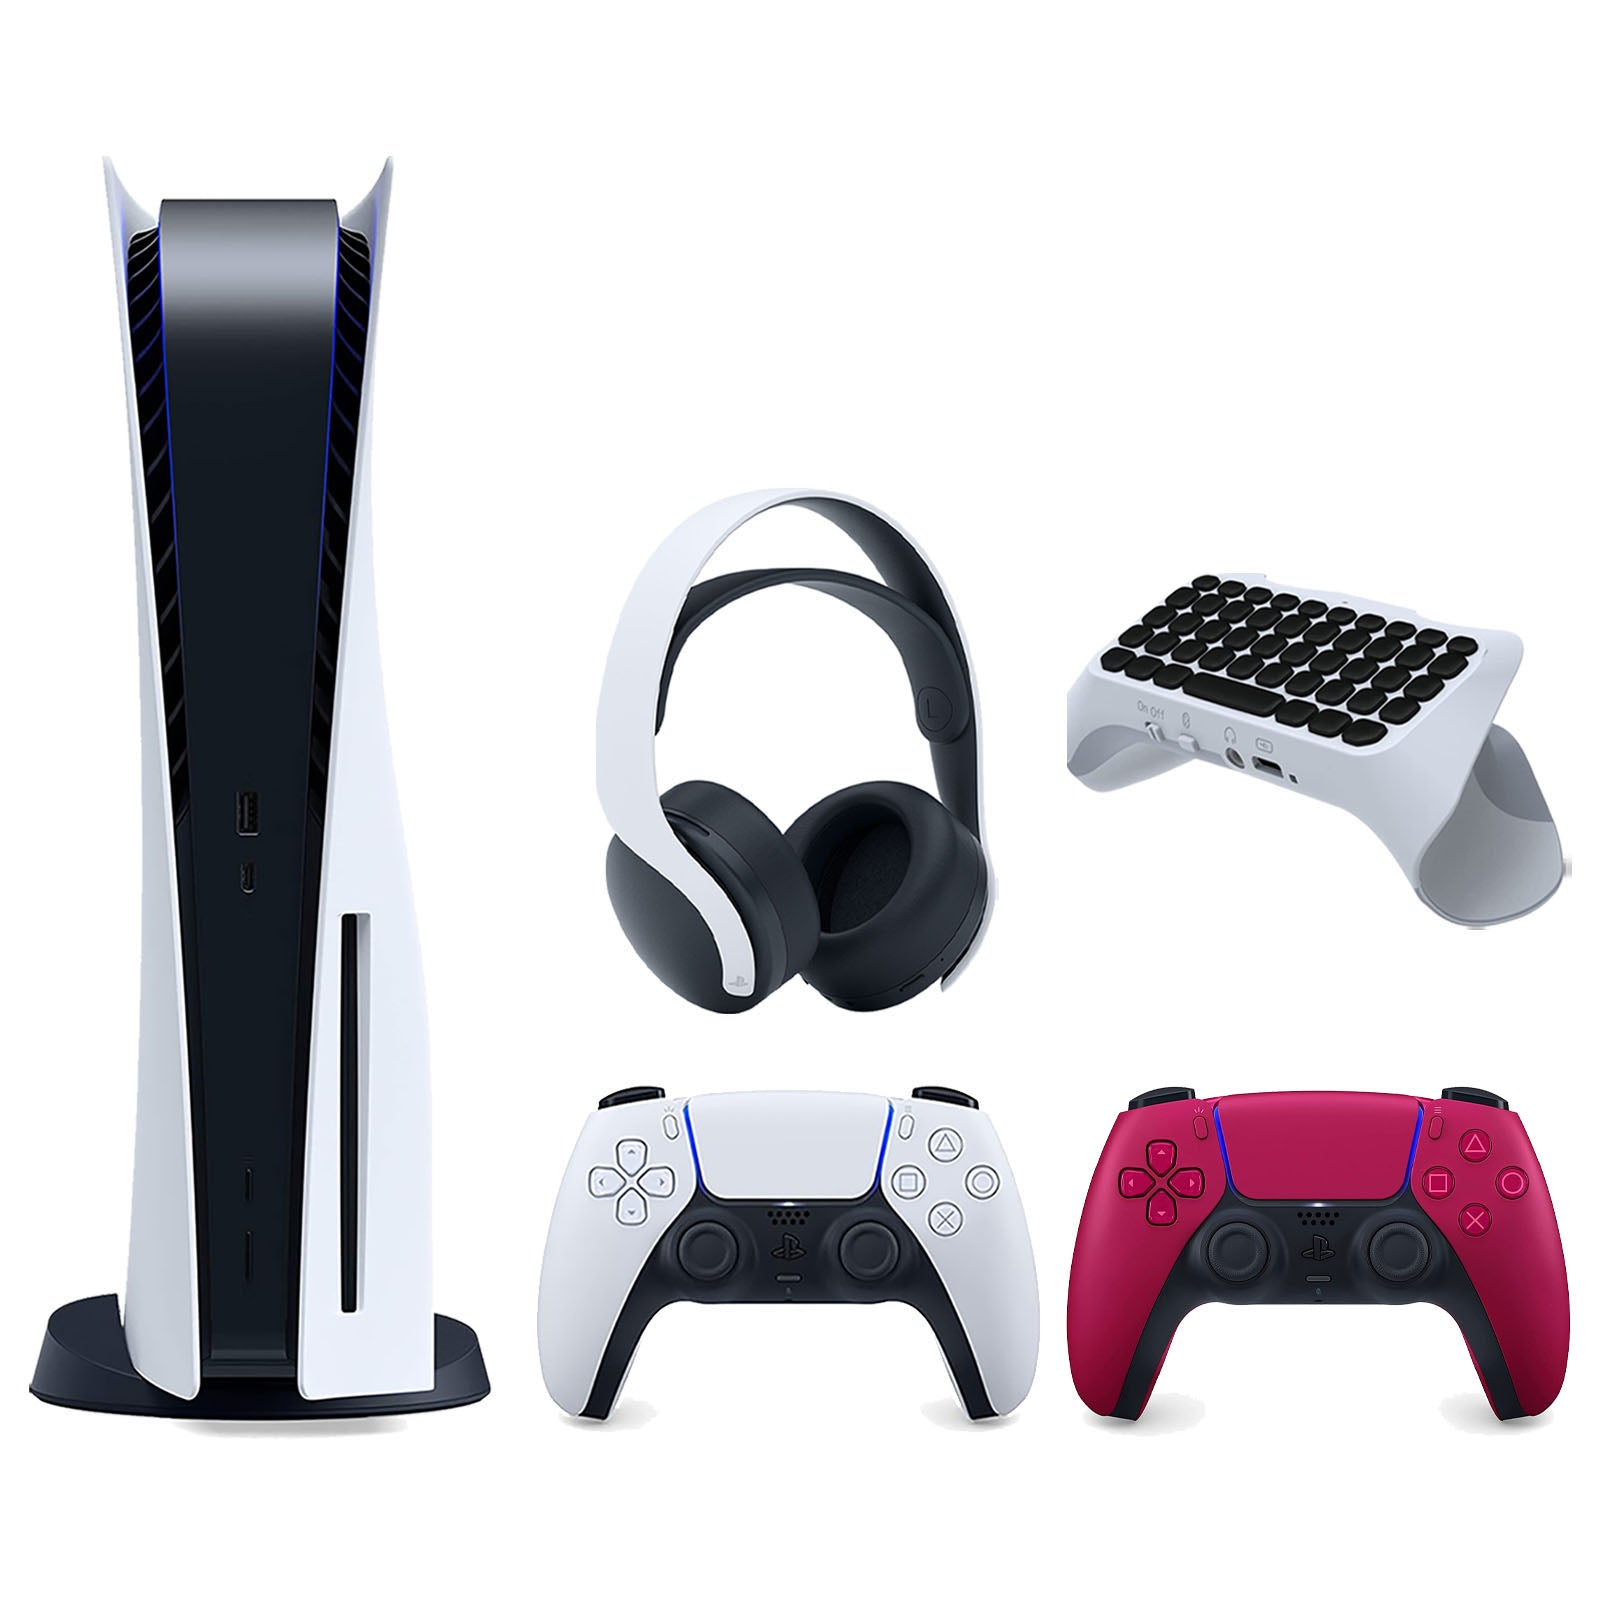 Sony Playstation 5 Disc Version Console with Extra Red Controller, White PULSE 3D Headset and Surge QuickType 2.0 Wireless PS5 Controller Keypad Bundle - Pro-Distributing